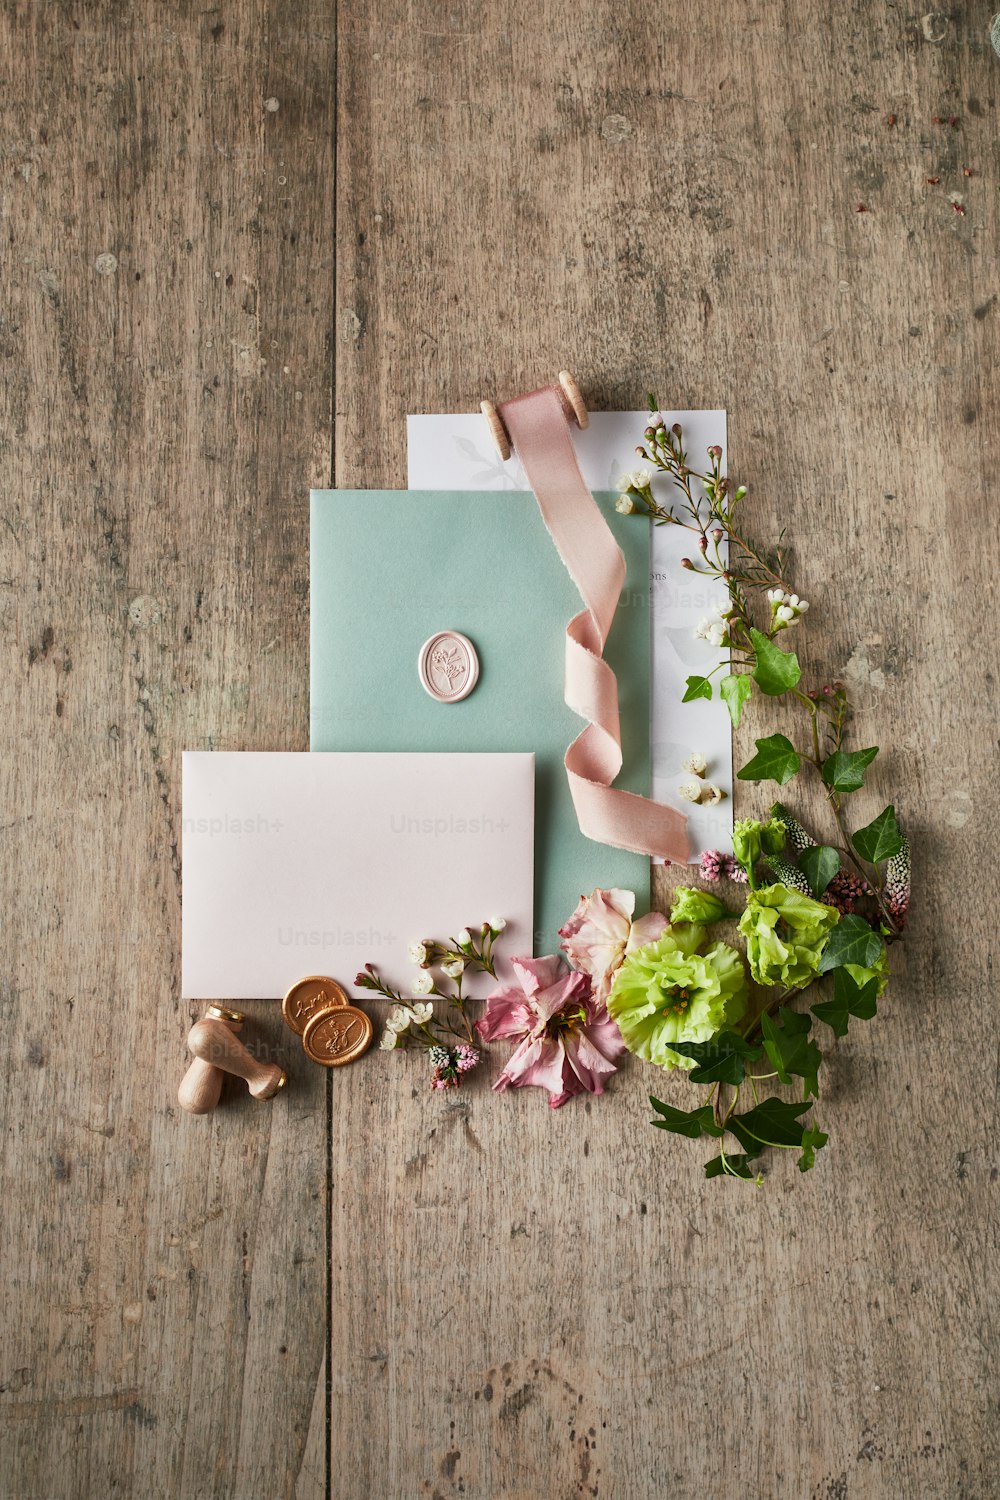 a bouquet of flowers sitting next to a wedding stationery